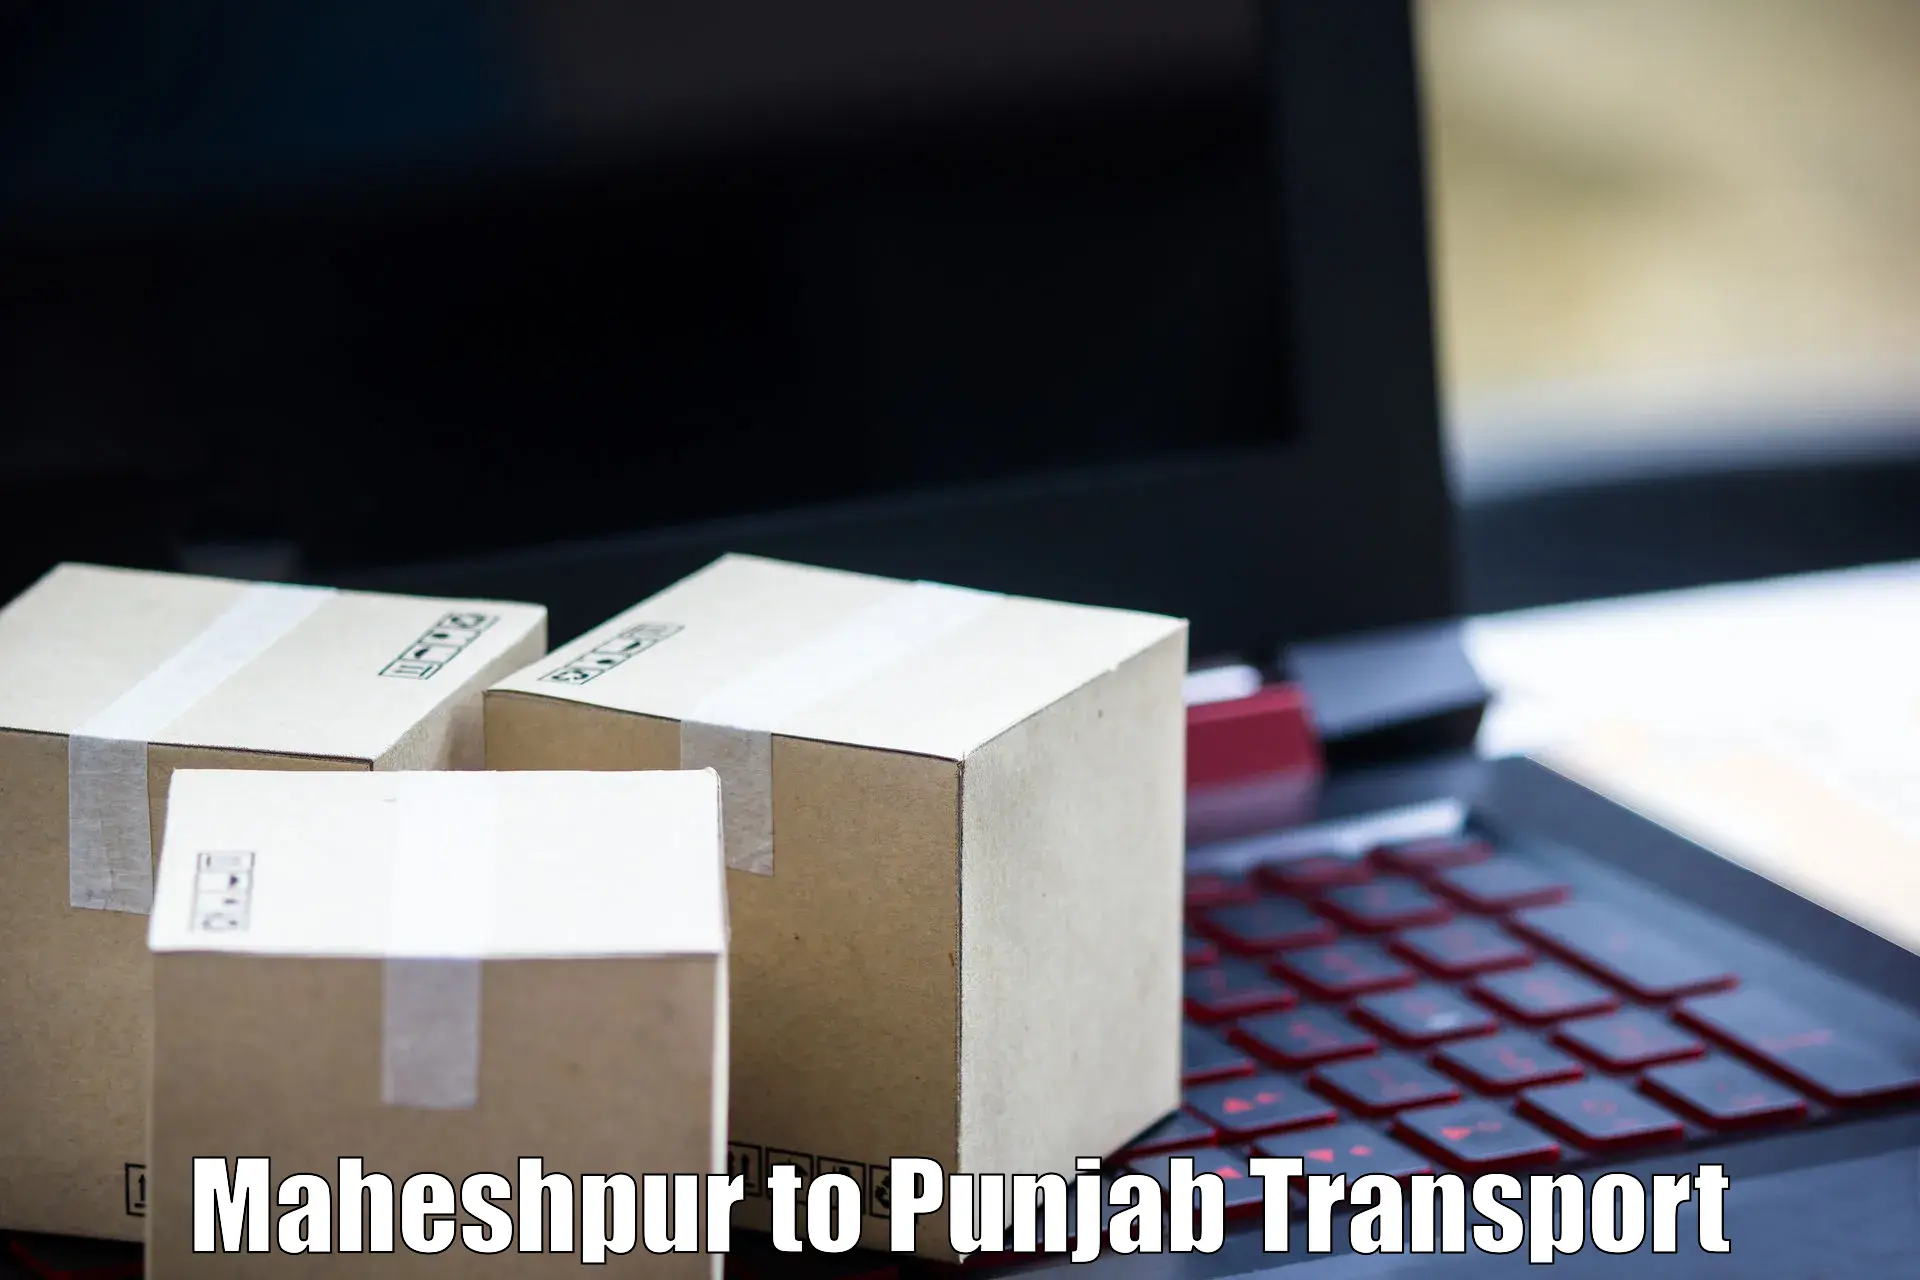 Online transport booking Maheshpur to Sultanpur Lodhi